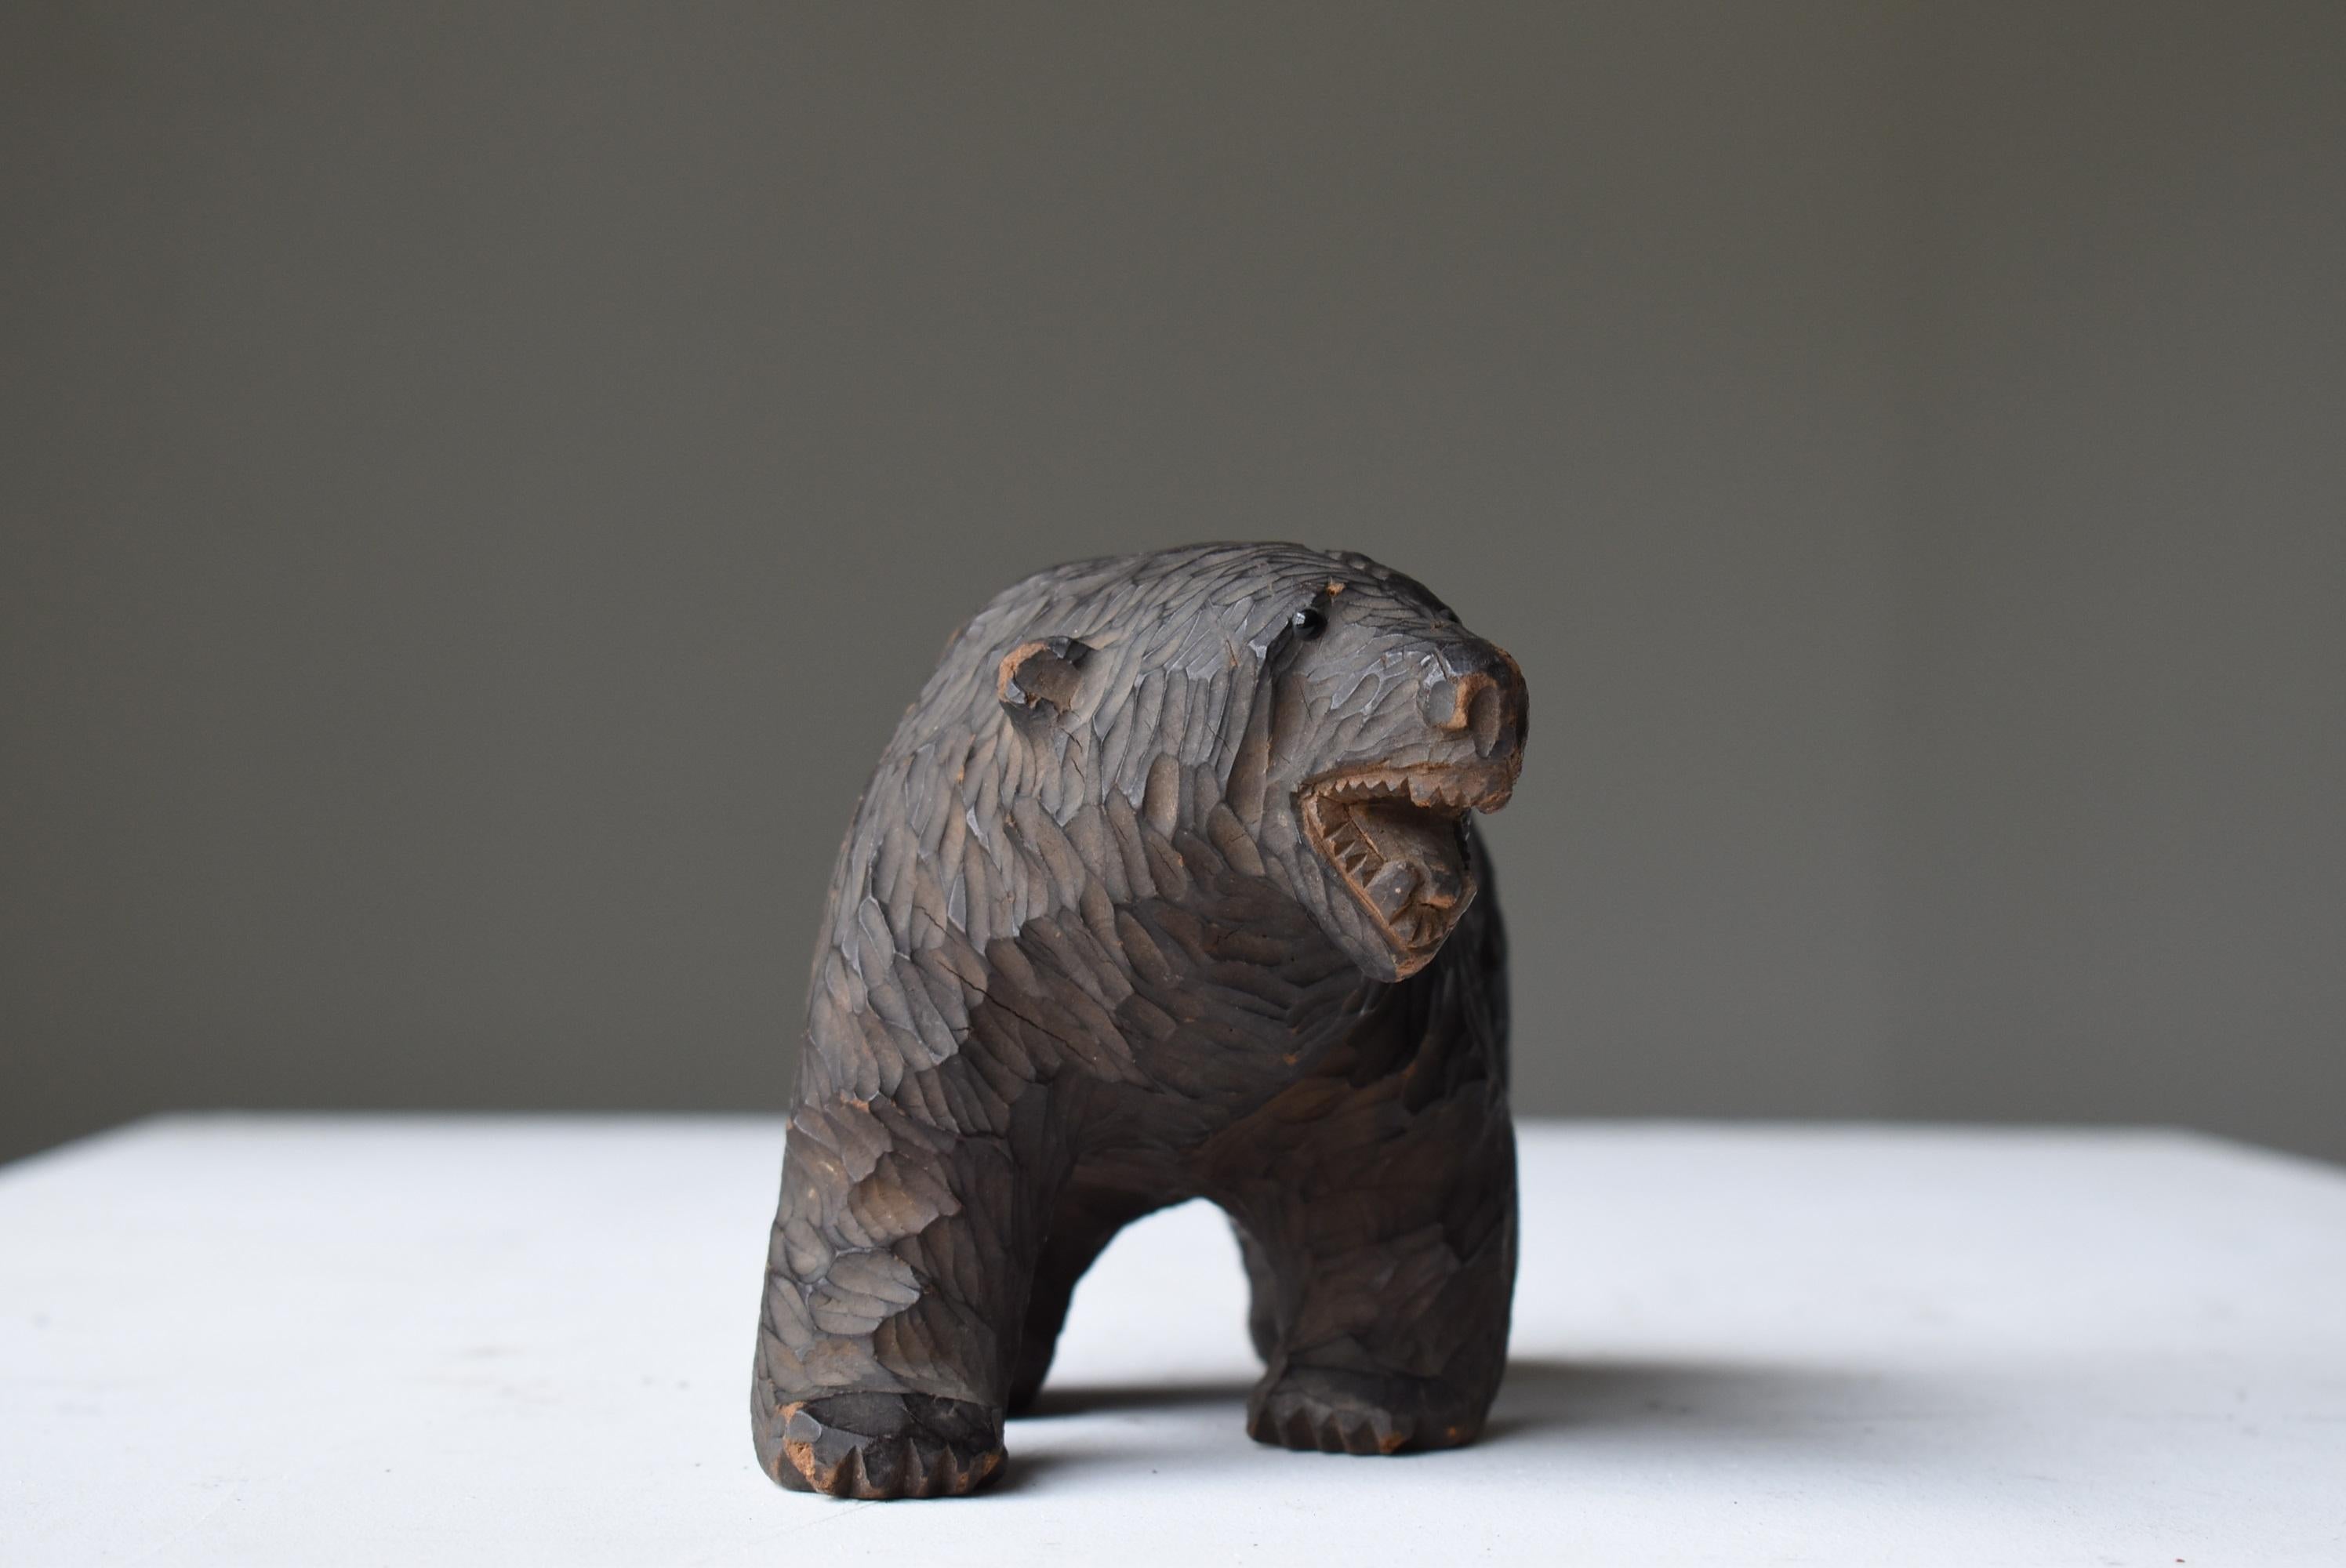 Japanese Old Wood Carving Bear 1930s-1950s/Vintage Figurine Sculpture Folk Art In Good Condition For Sale In Sammu-shi, Chiba